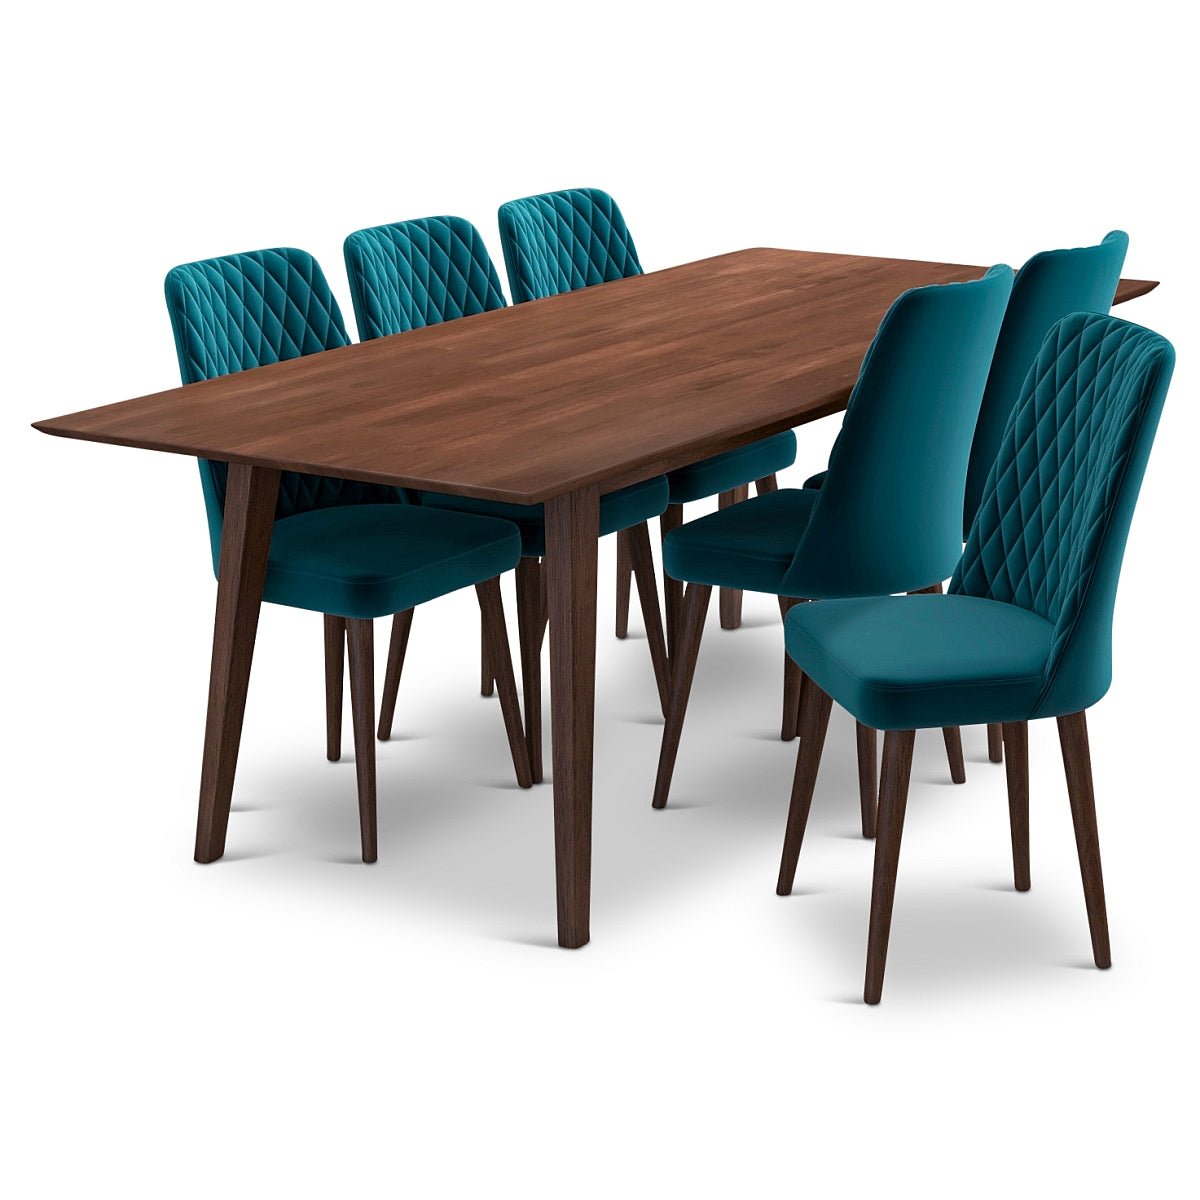 Adira (XLarge - Walnut) Dining Set with 6 Evette (Teal Velvet) Dining Chairs